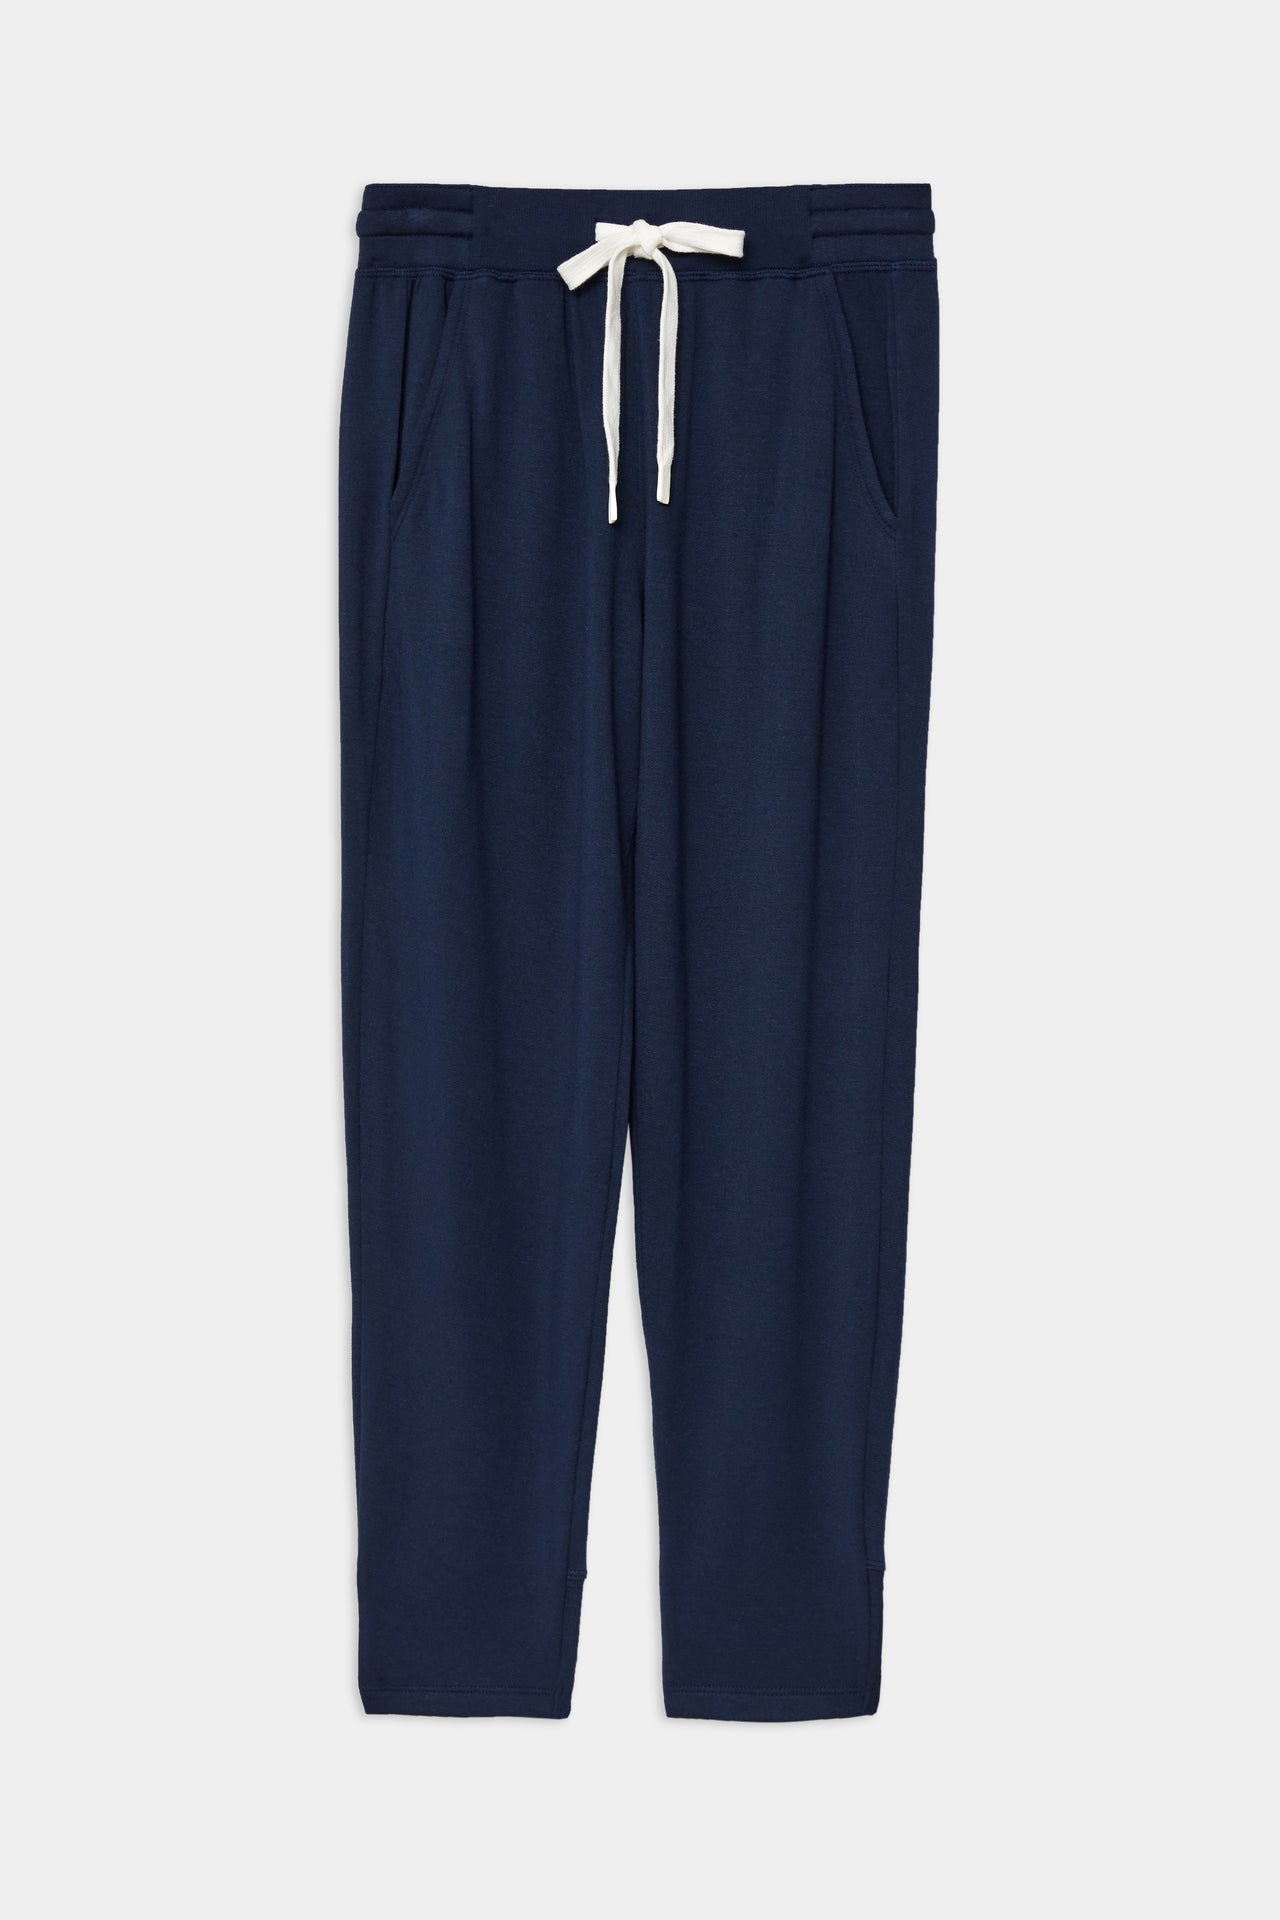 Front flat view of dark blue sweatpant with tapered leg and above ankle length with white drawstring and side hip pockets